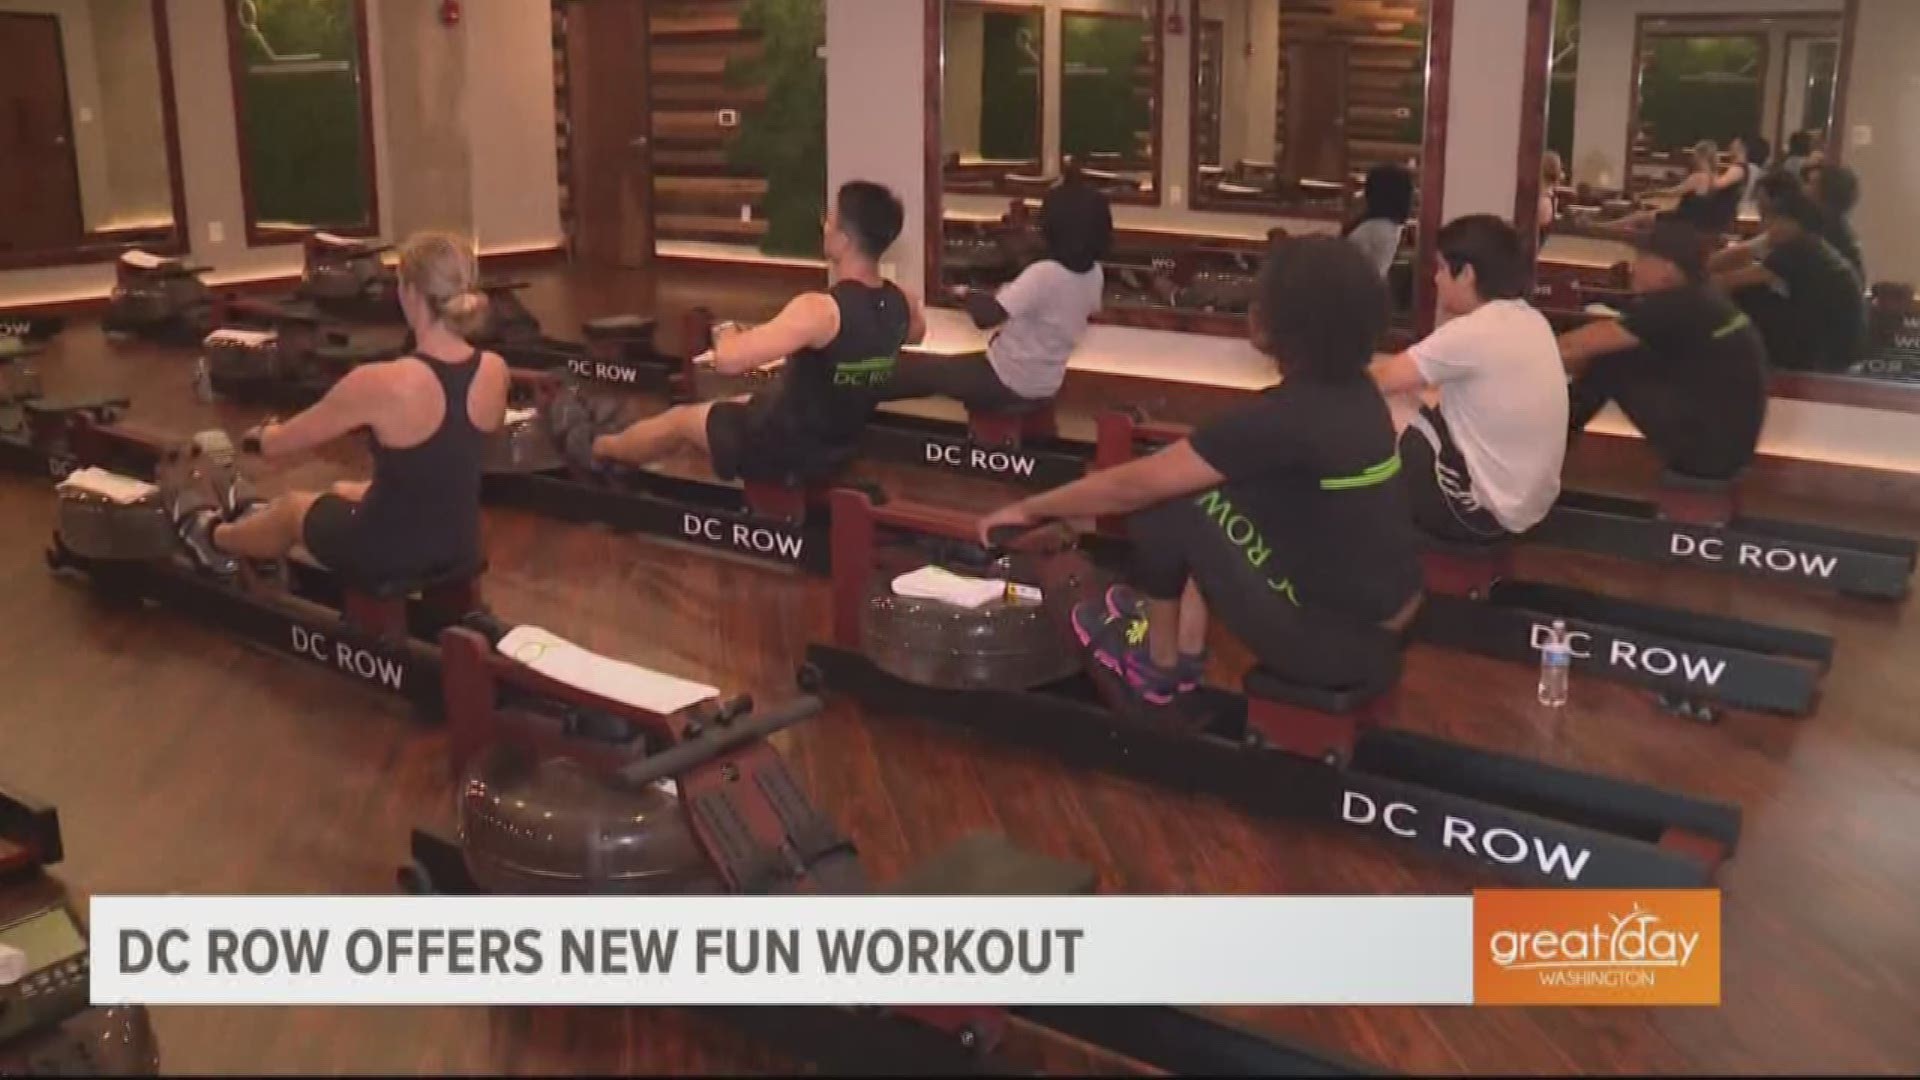 DC Row offers a indoor rowing workout that is full body exercise for people of all fitness levels.